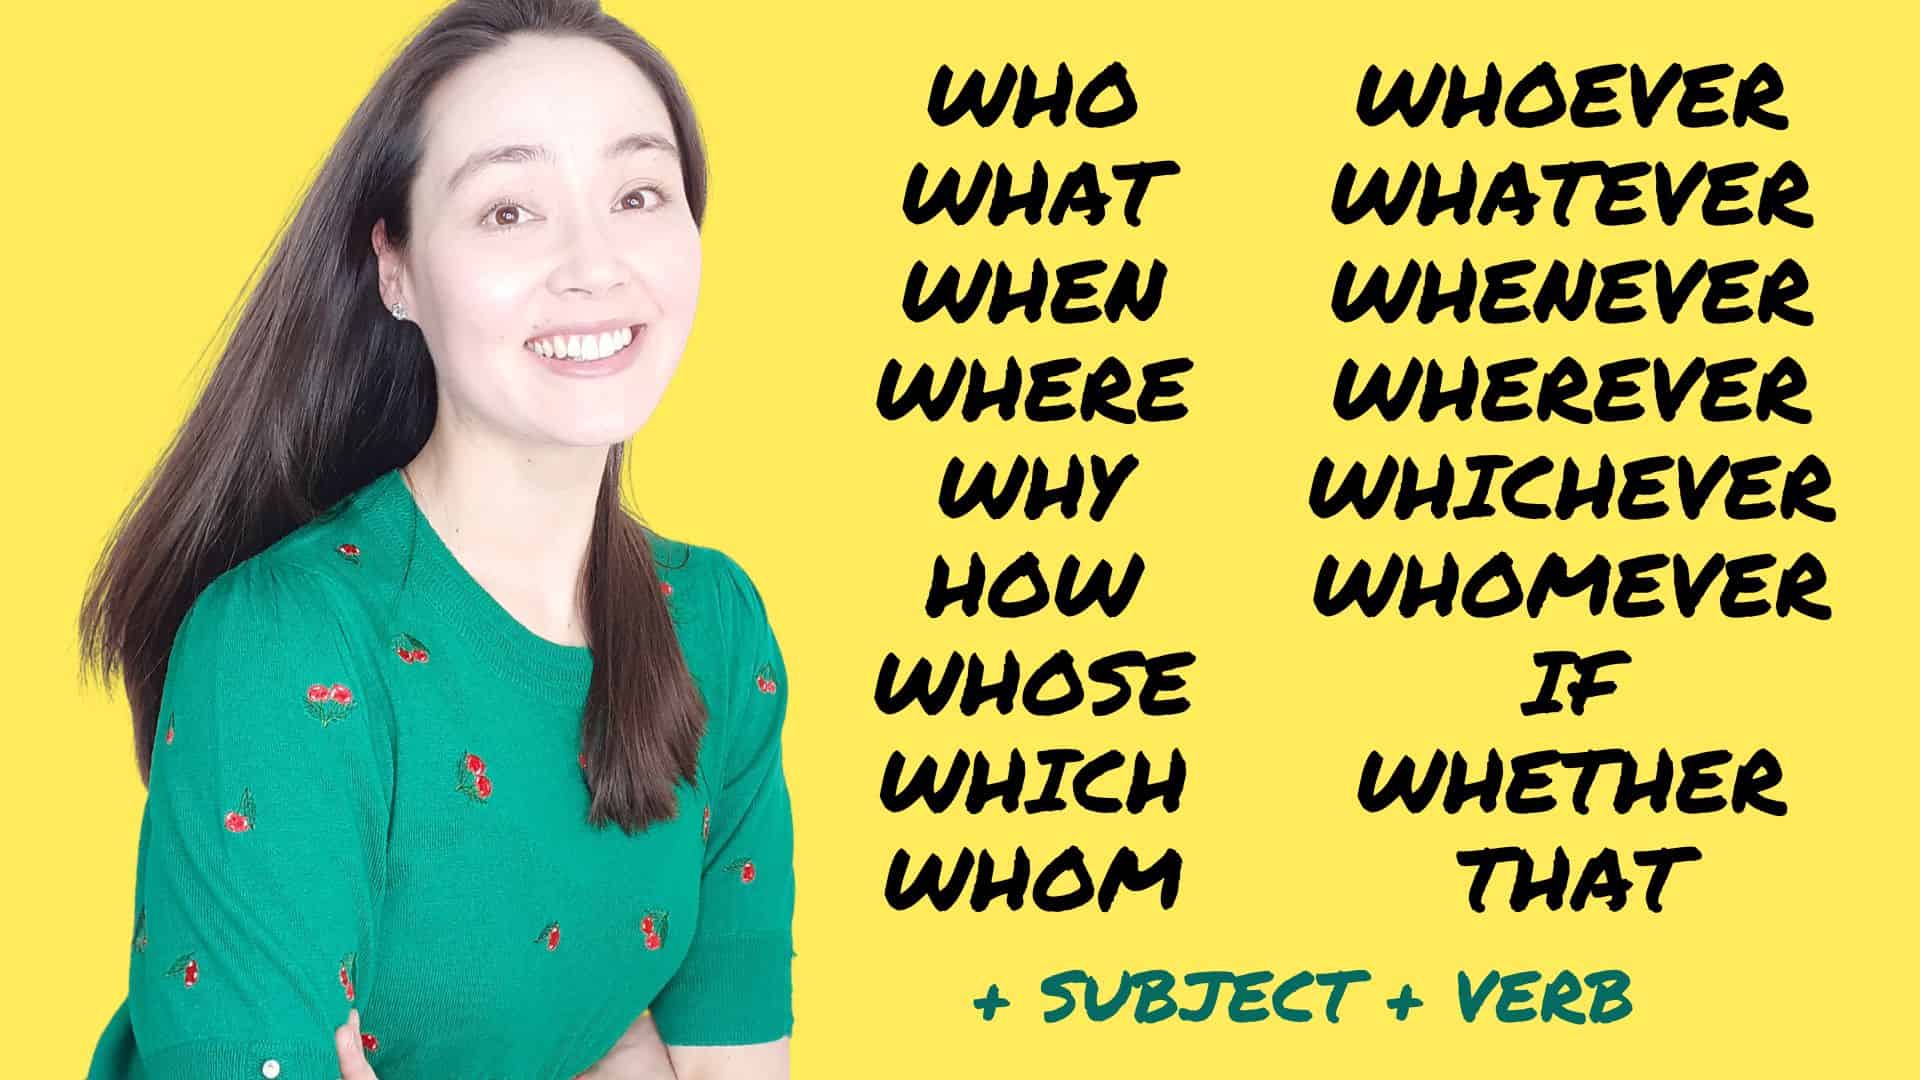 NOUN CLAUSES in 3 simple steps | wh- + subject + verb